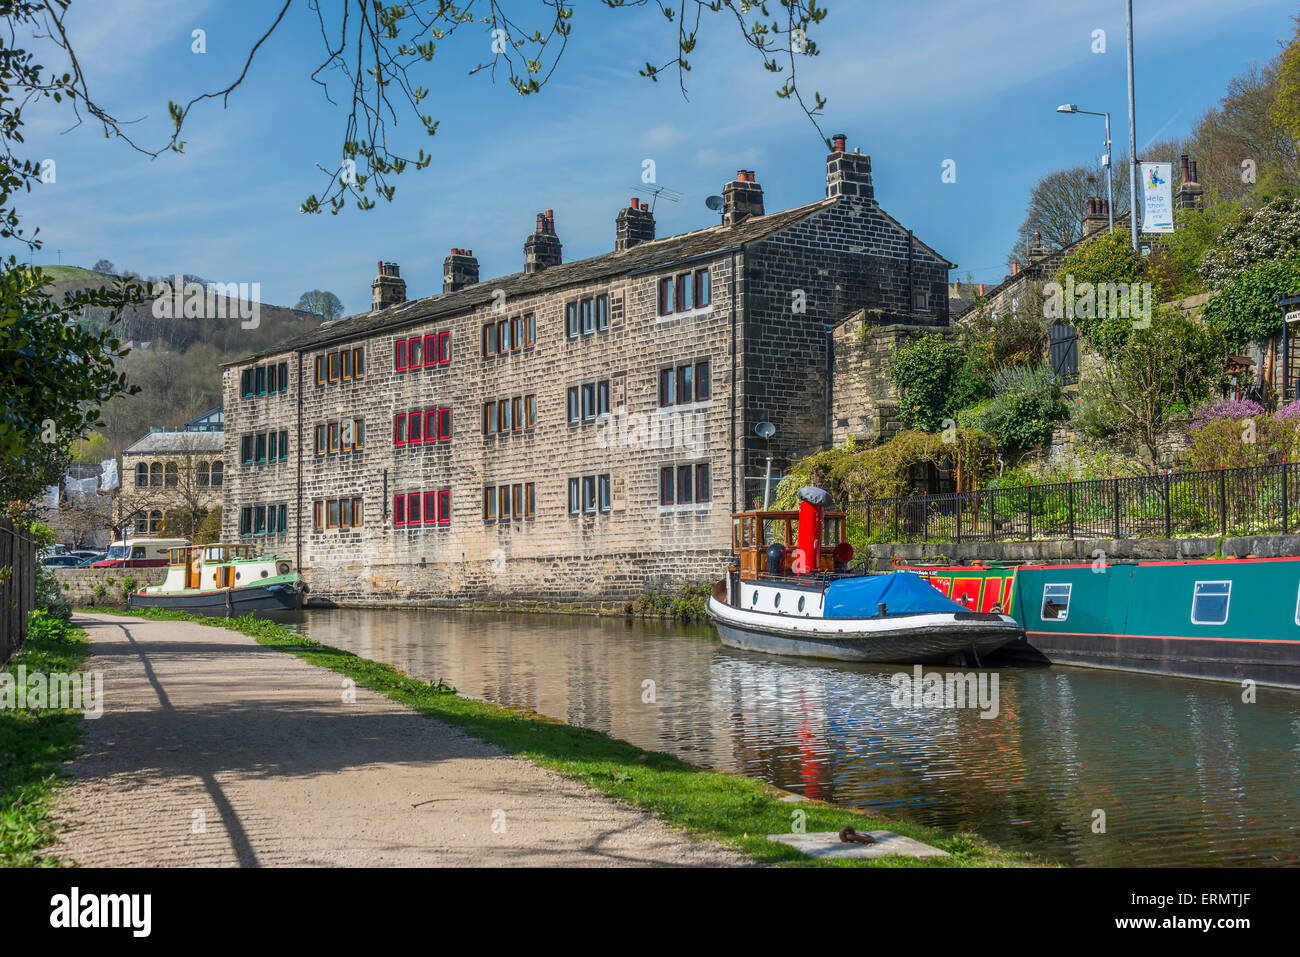 The pretty tourist town of Hebden Bridge in the South Pennine region of West Yorkshire showing steep terraced houses on the surr Stock Photo